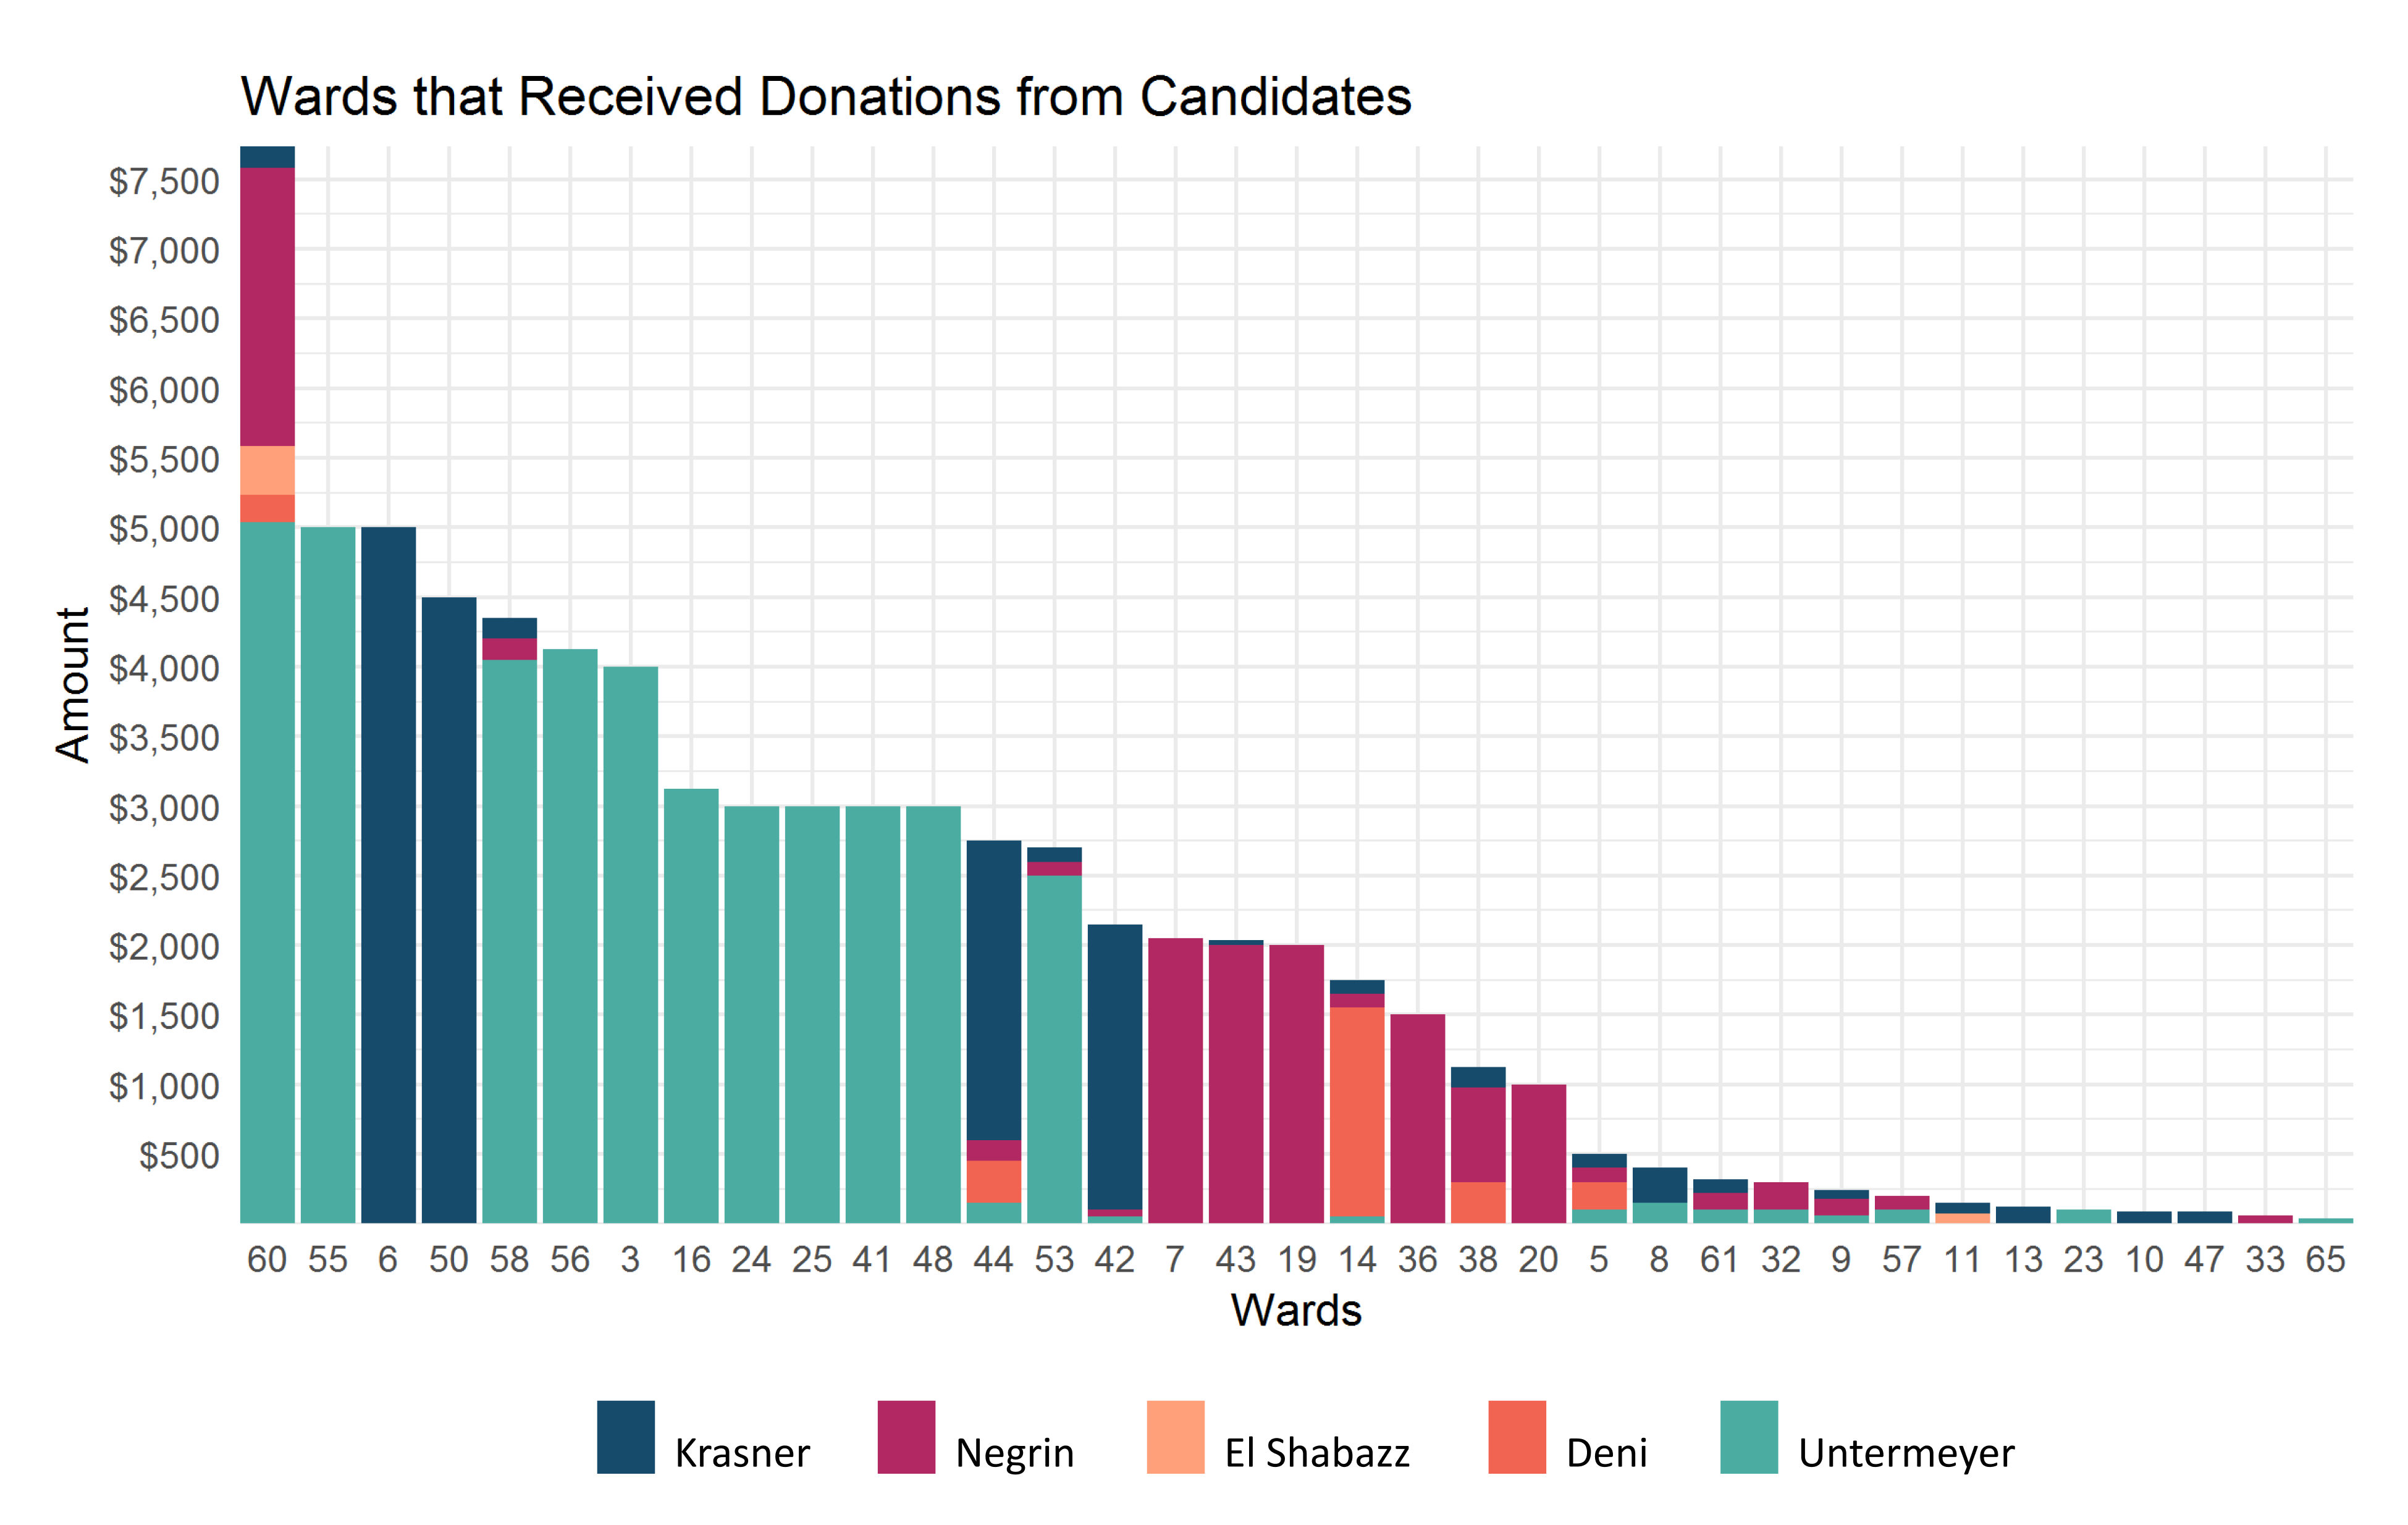 Wards that received campaign finance donations from candidates